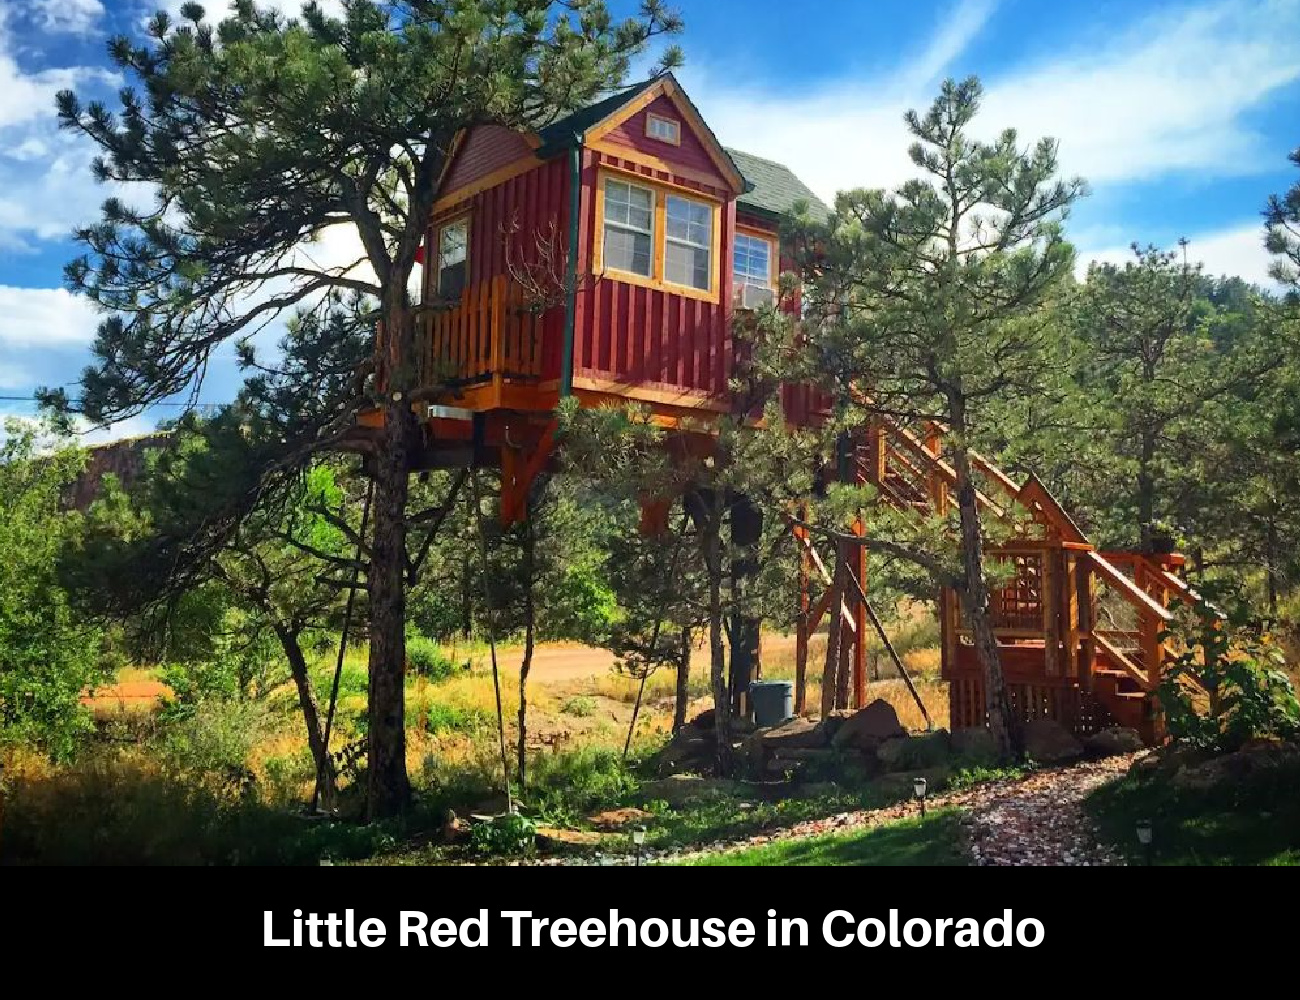 Little Red Treehouse in Colorado